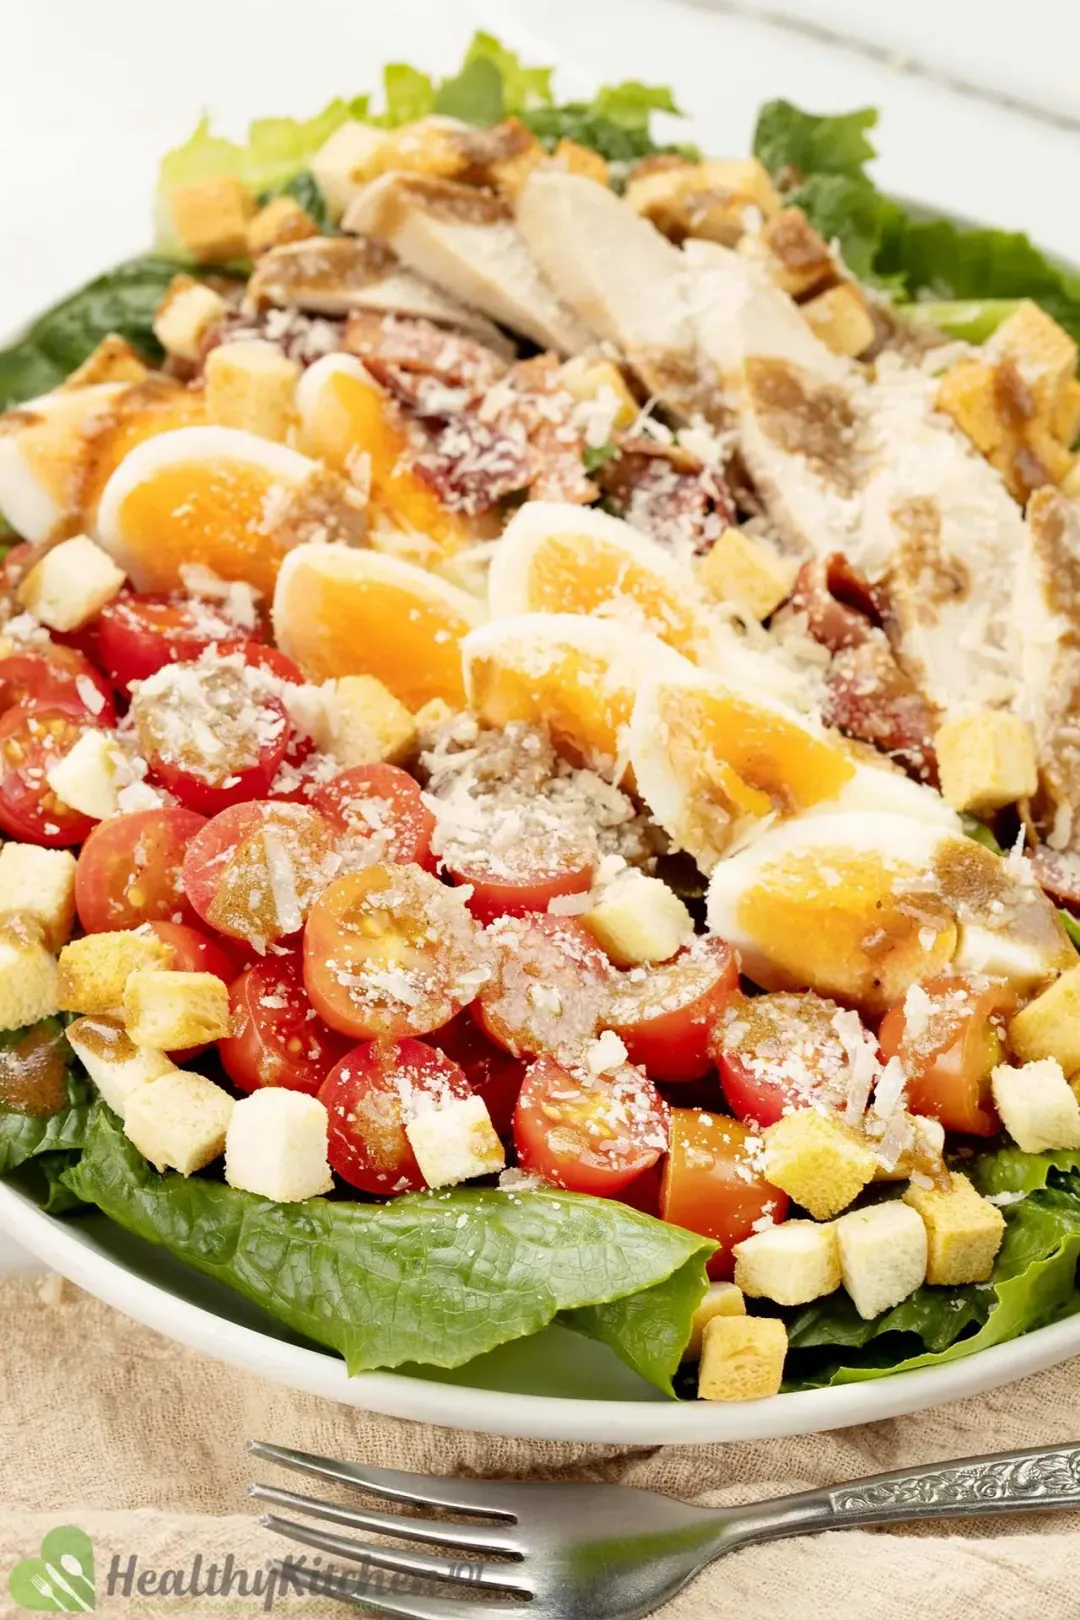 A close-up of a homemade Caesar salad with lettuce, croutons, Parmesan cheese, and cherry tomatoes